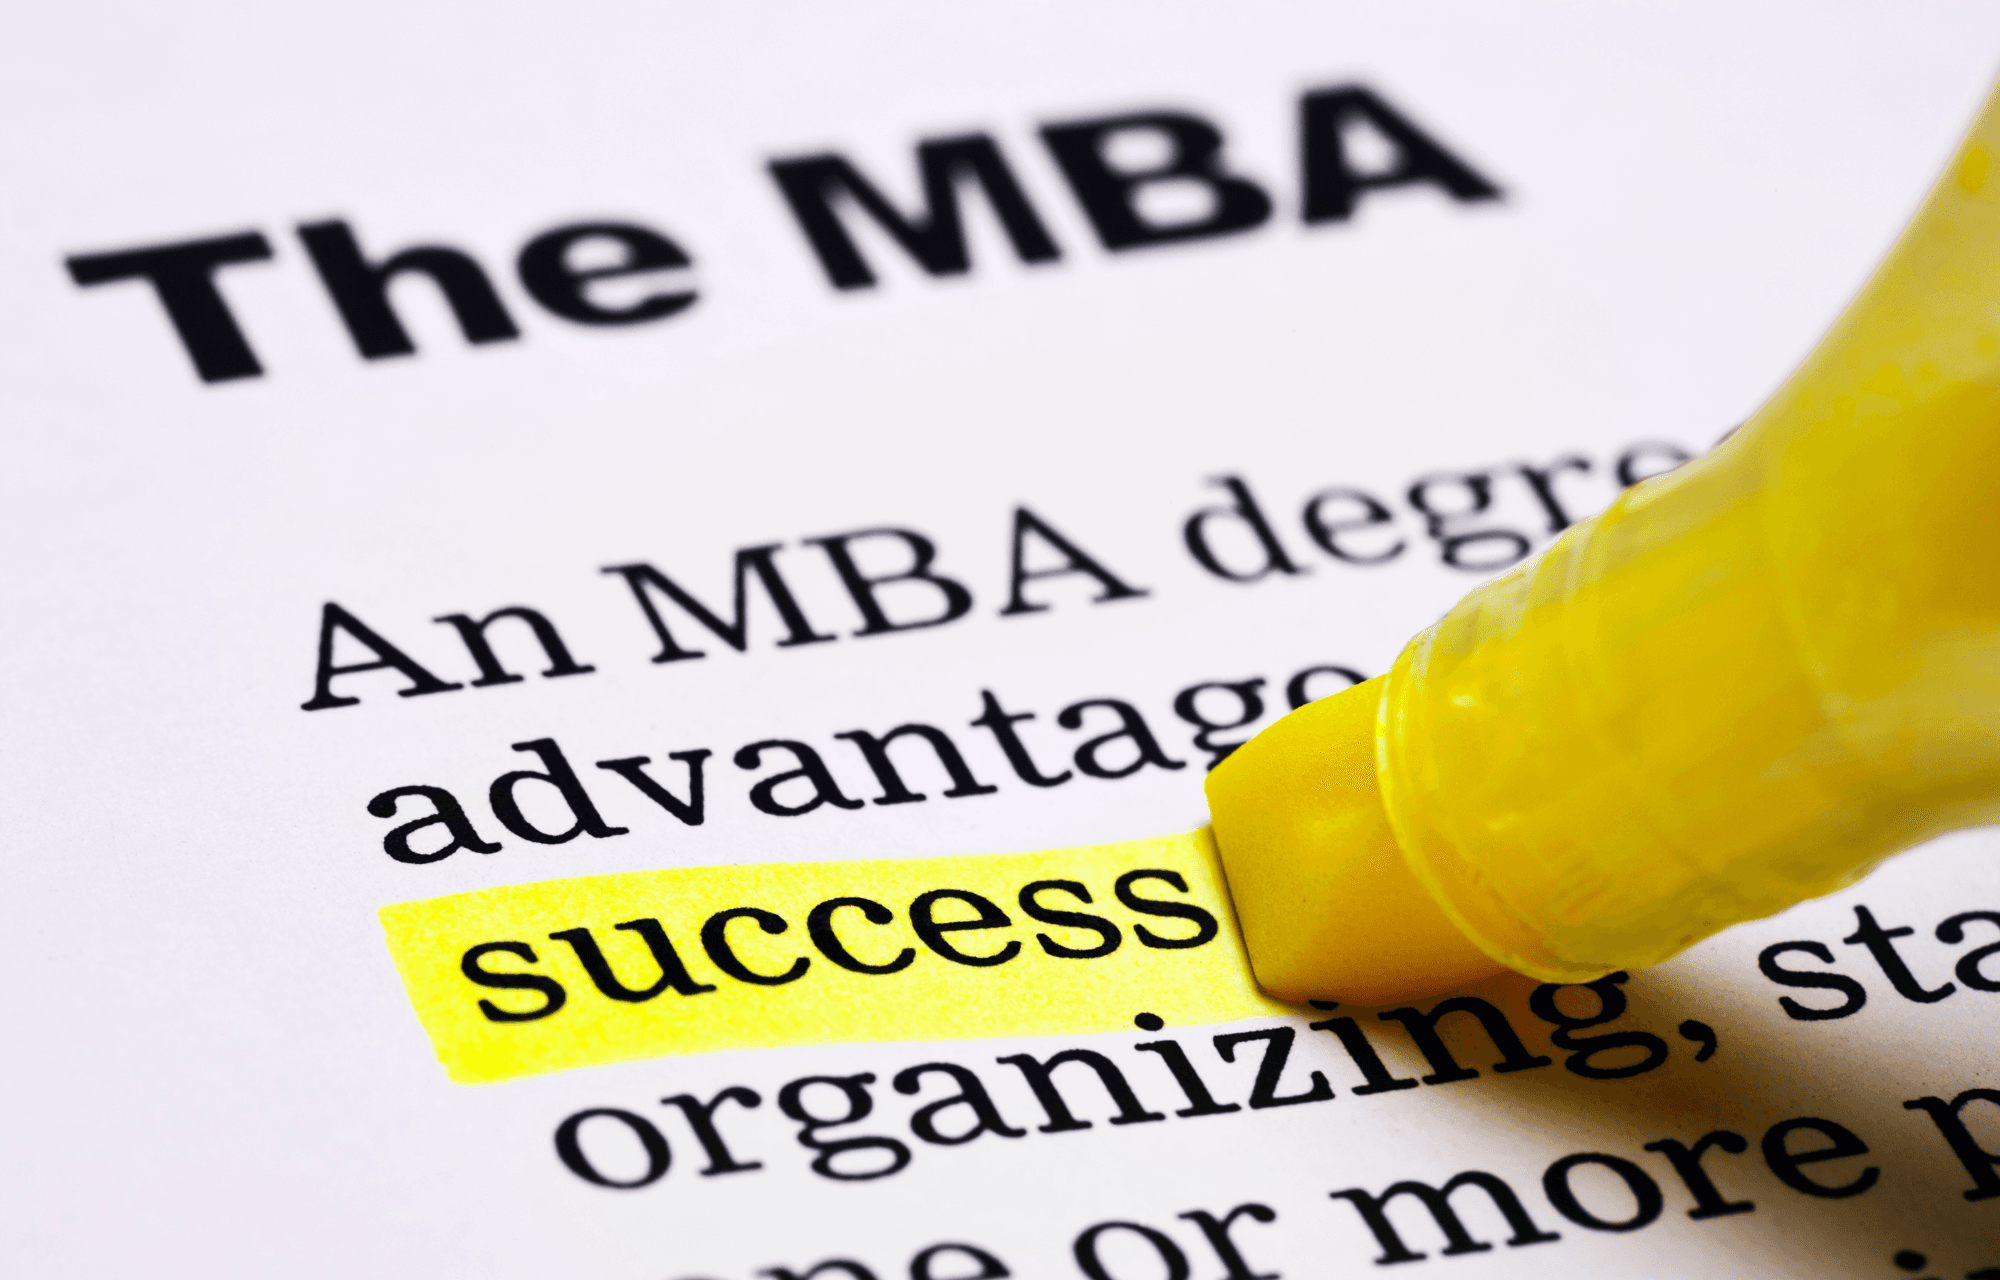 How to Answer the "Why an MBA?" Essay Question